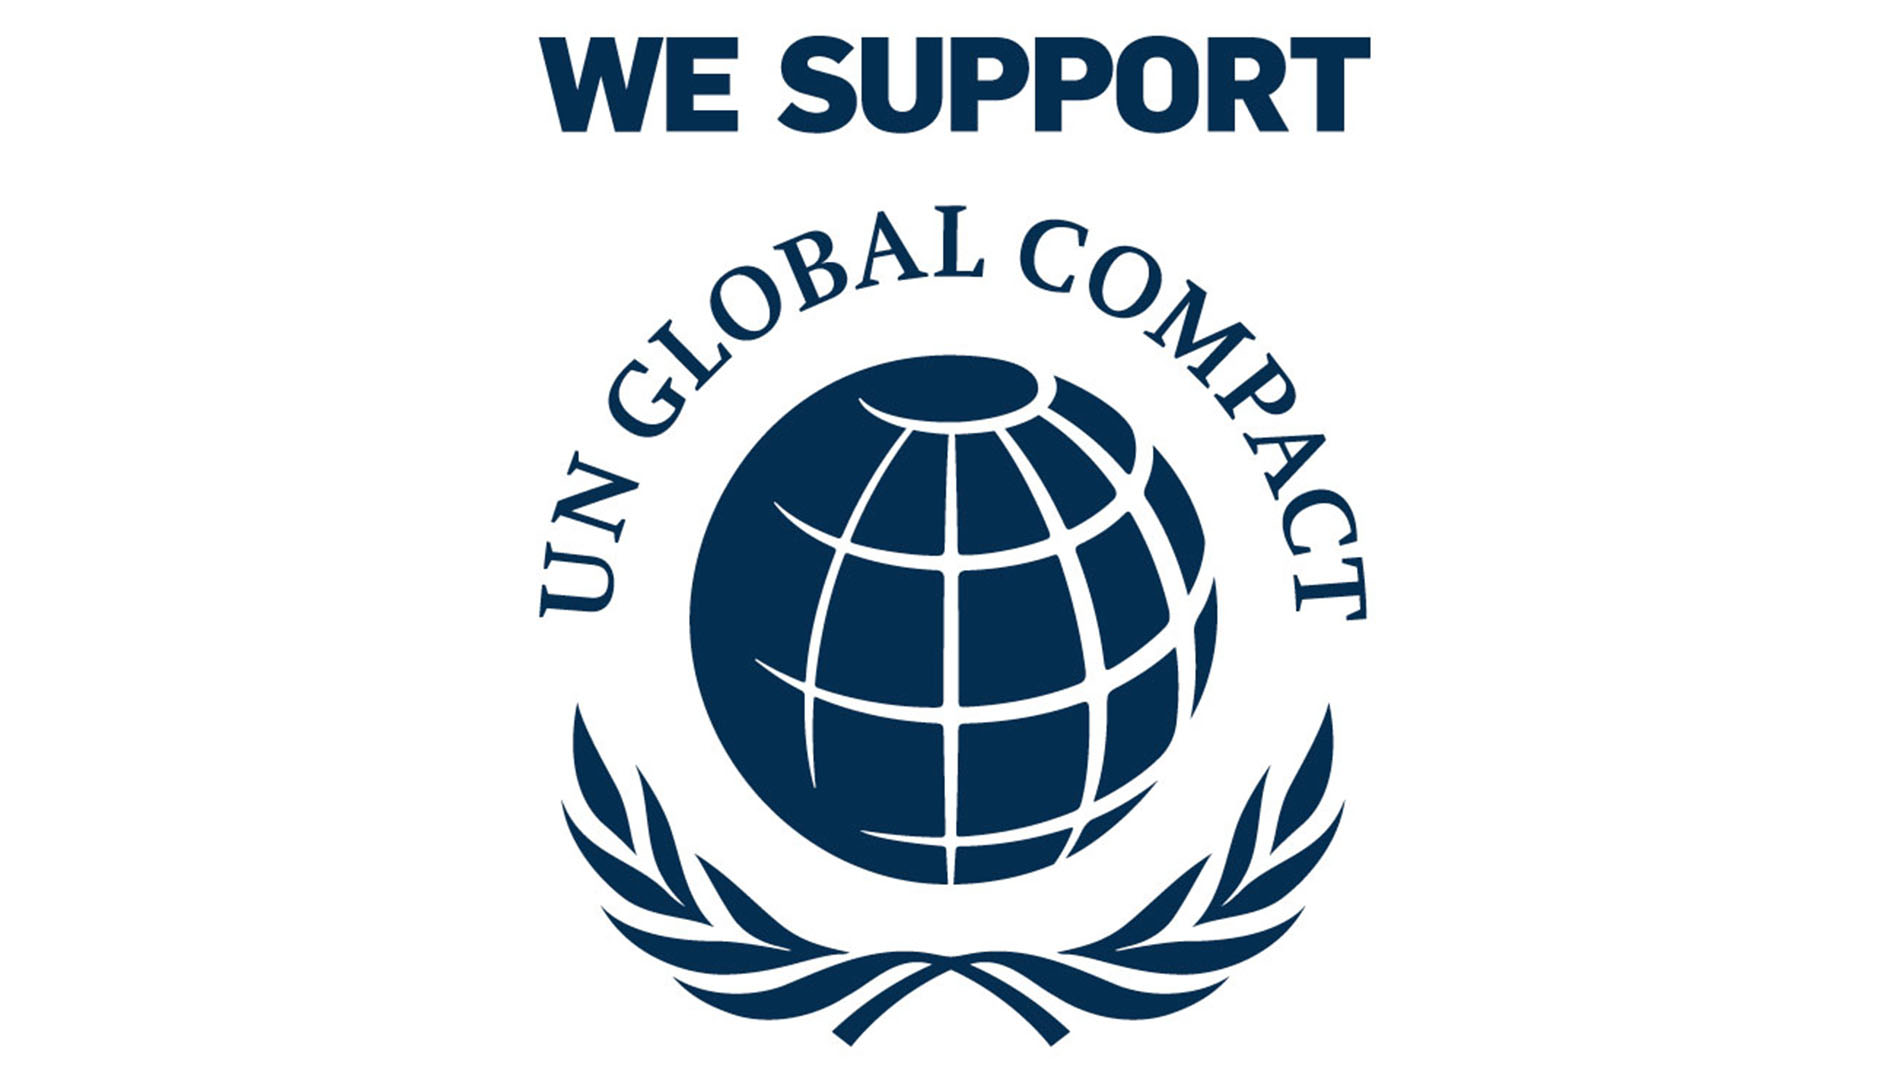 Adherence to the UN Global Compact